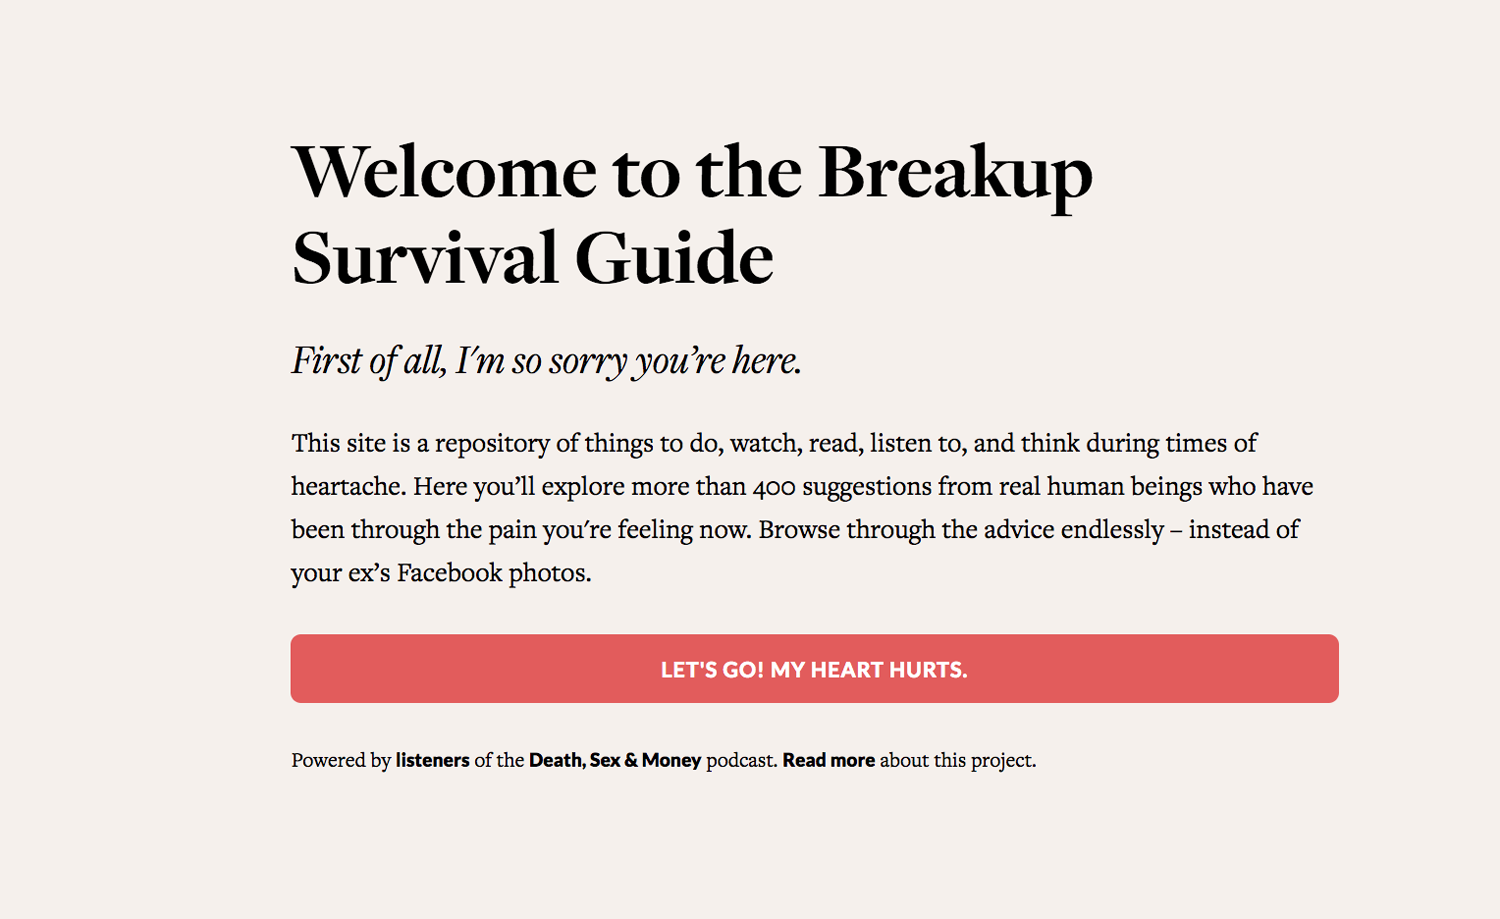 One woman was inspired by Death, Sex and Money to create a breakup survival guide for everyone else